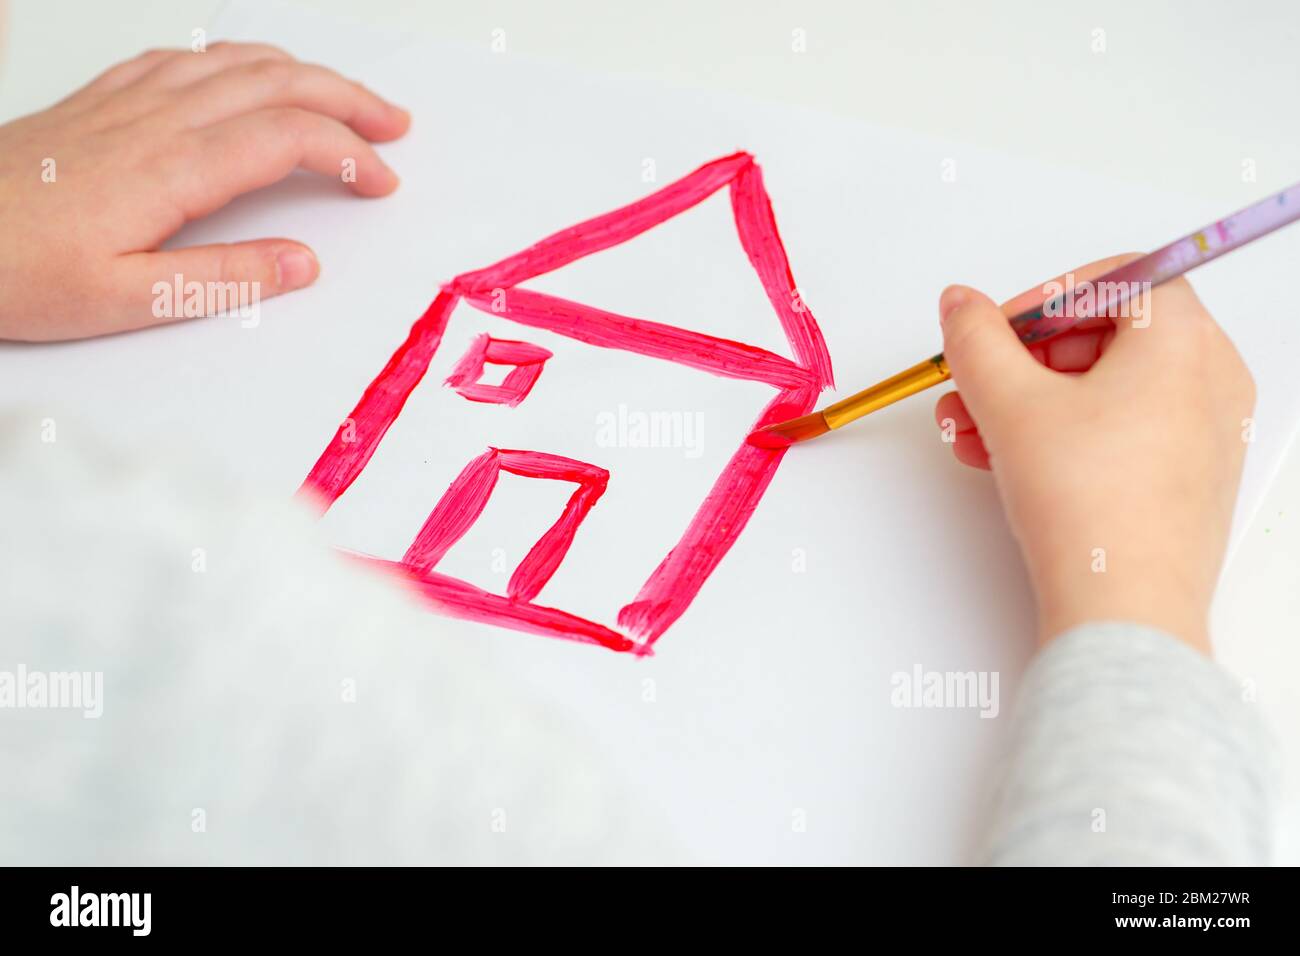 Closeup of hands of child drawing red house on white sheet of paper. Children's creativity concept. Stock Photo